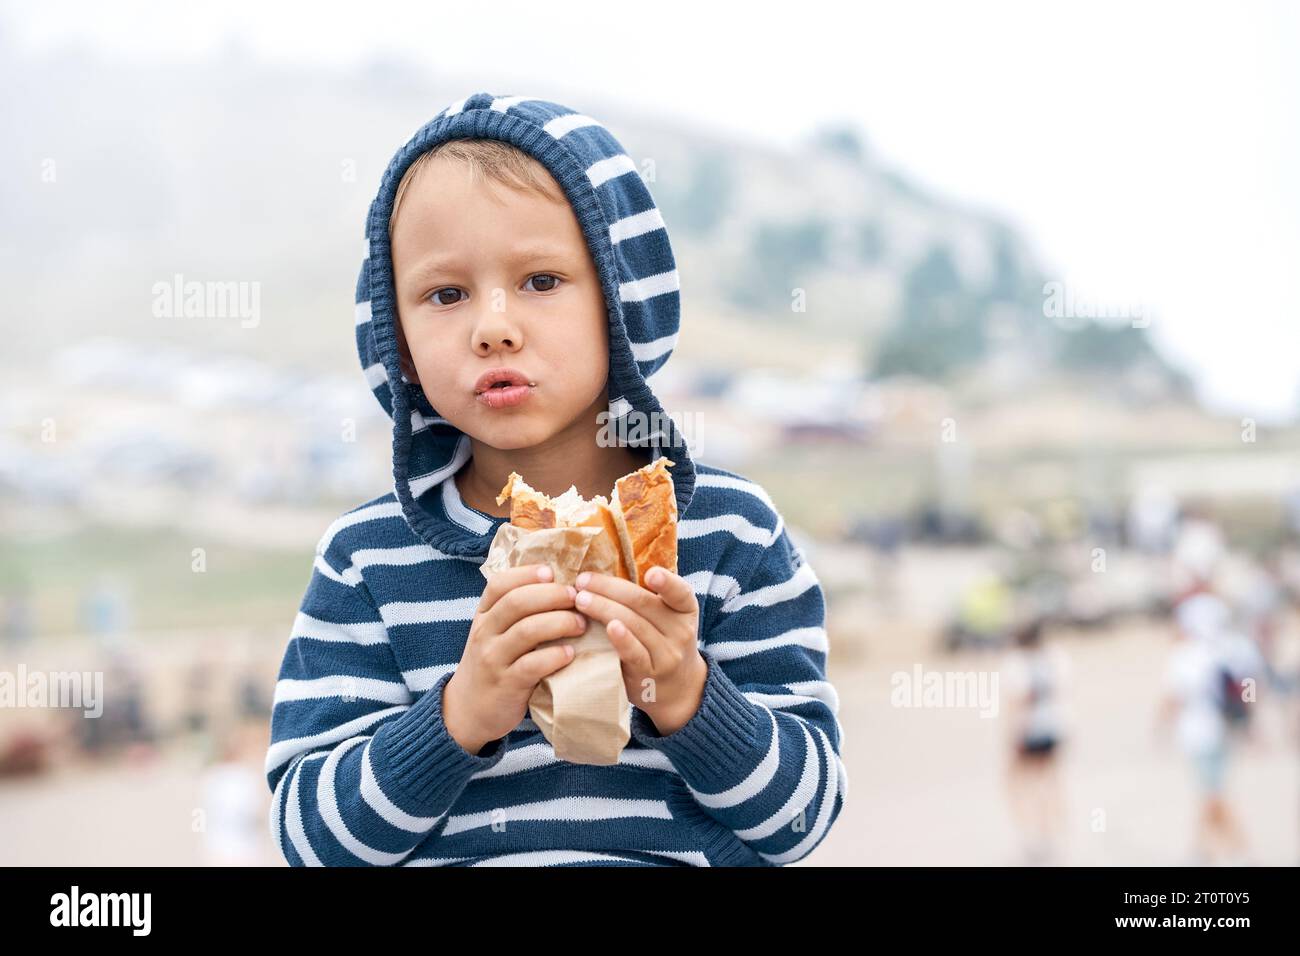 Lovely little boy holds tasty hotdog walking in mountain park. Child eating healthy snack on travel portrait. Calm kid with sandwich outdoors Stock Photo